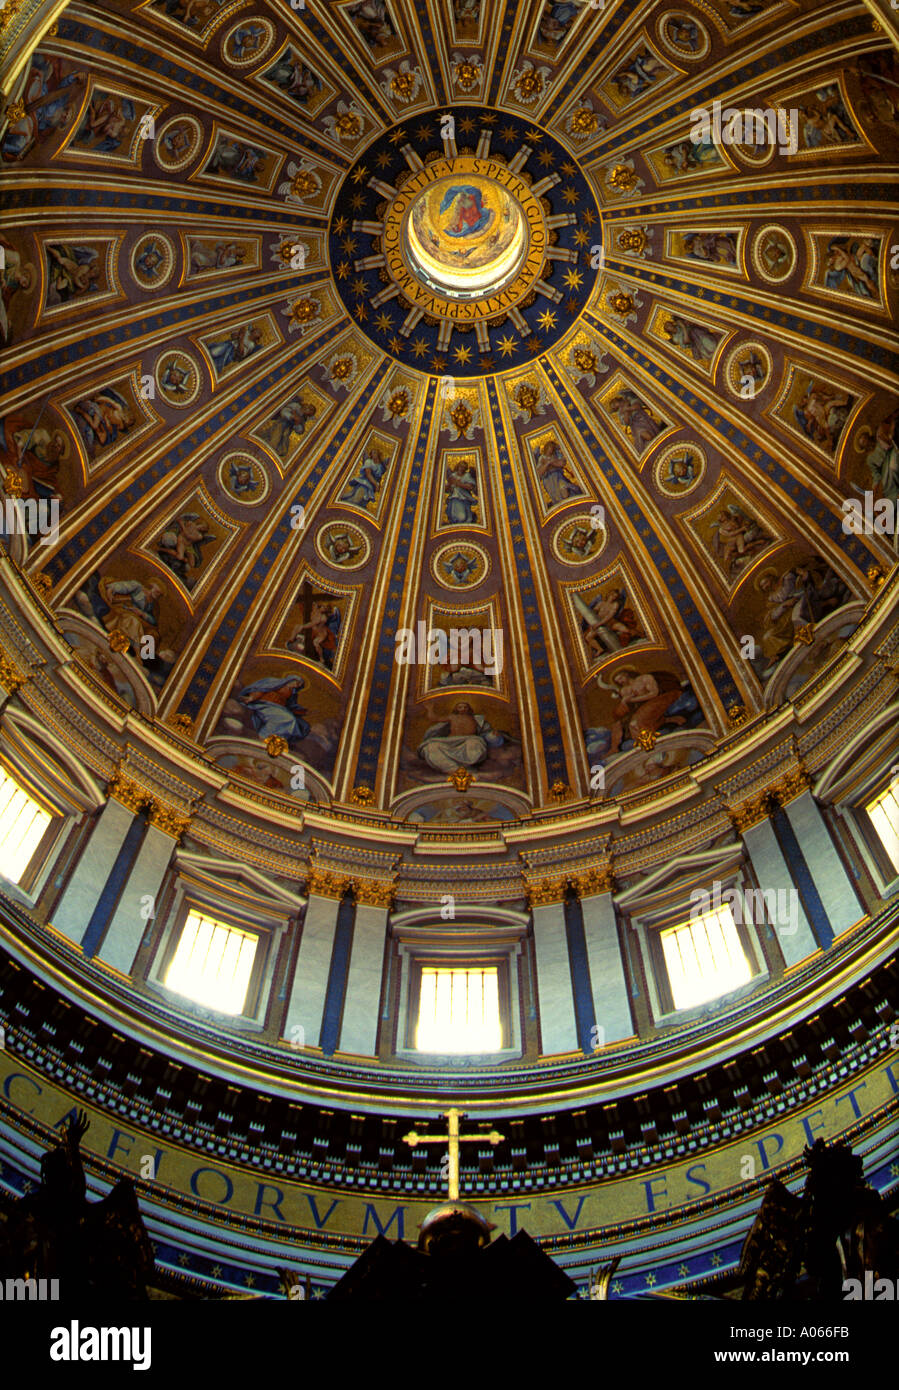 St Peter s cupola Vatican City Rome Italy Stock Photo